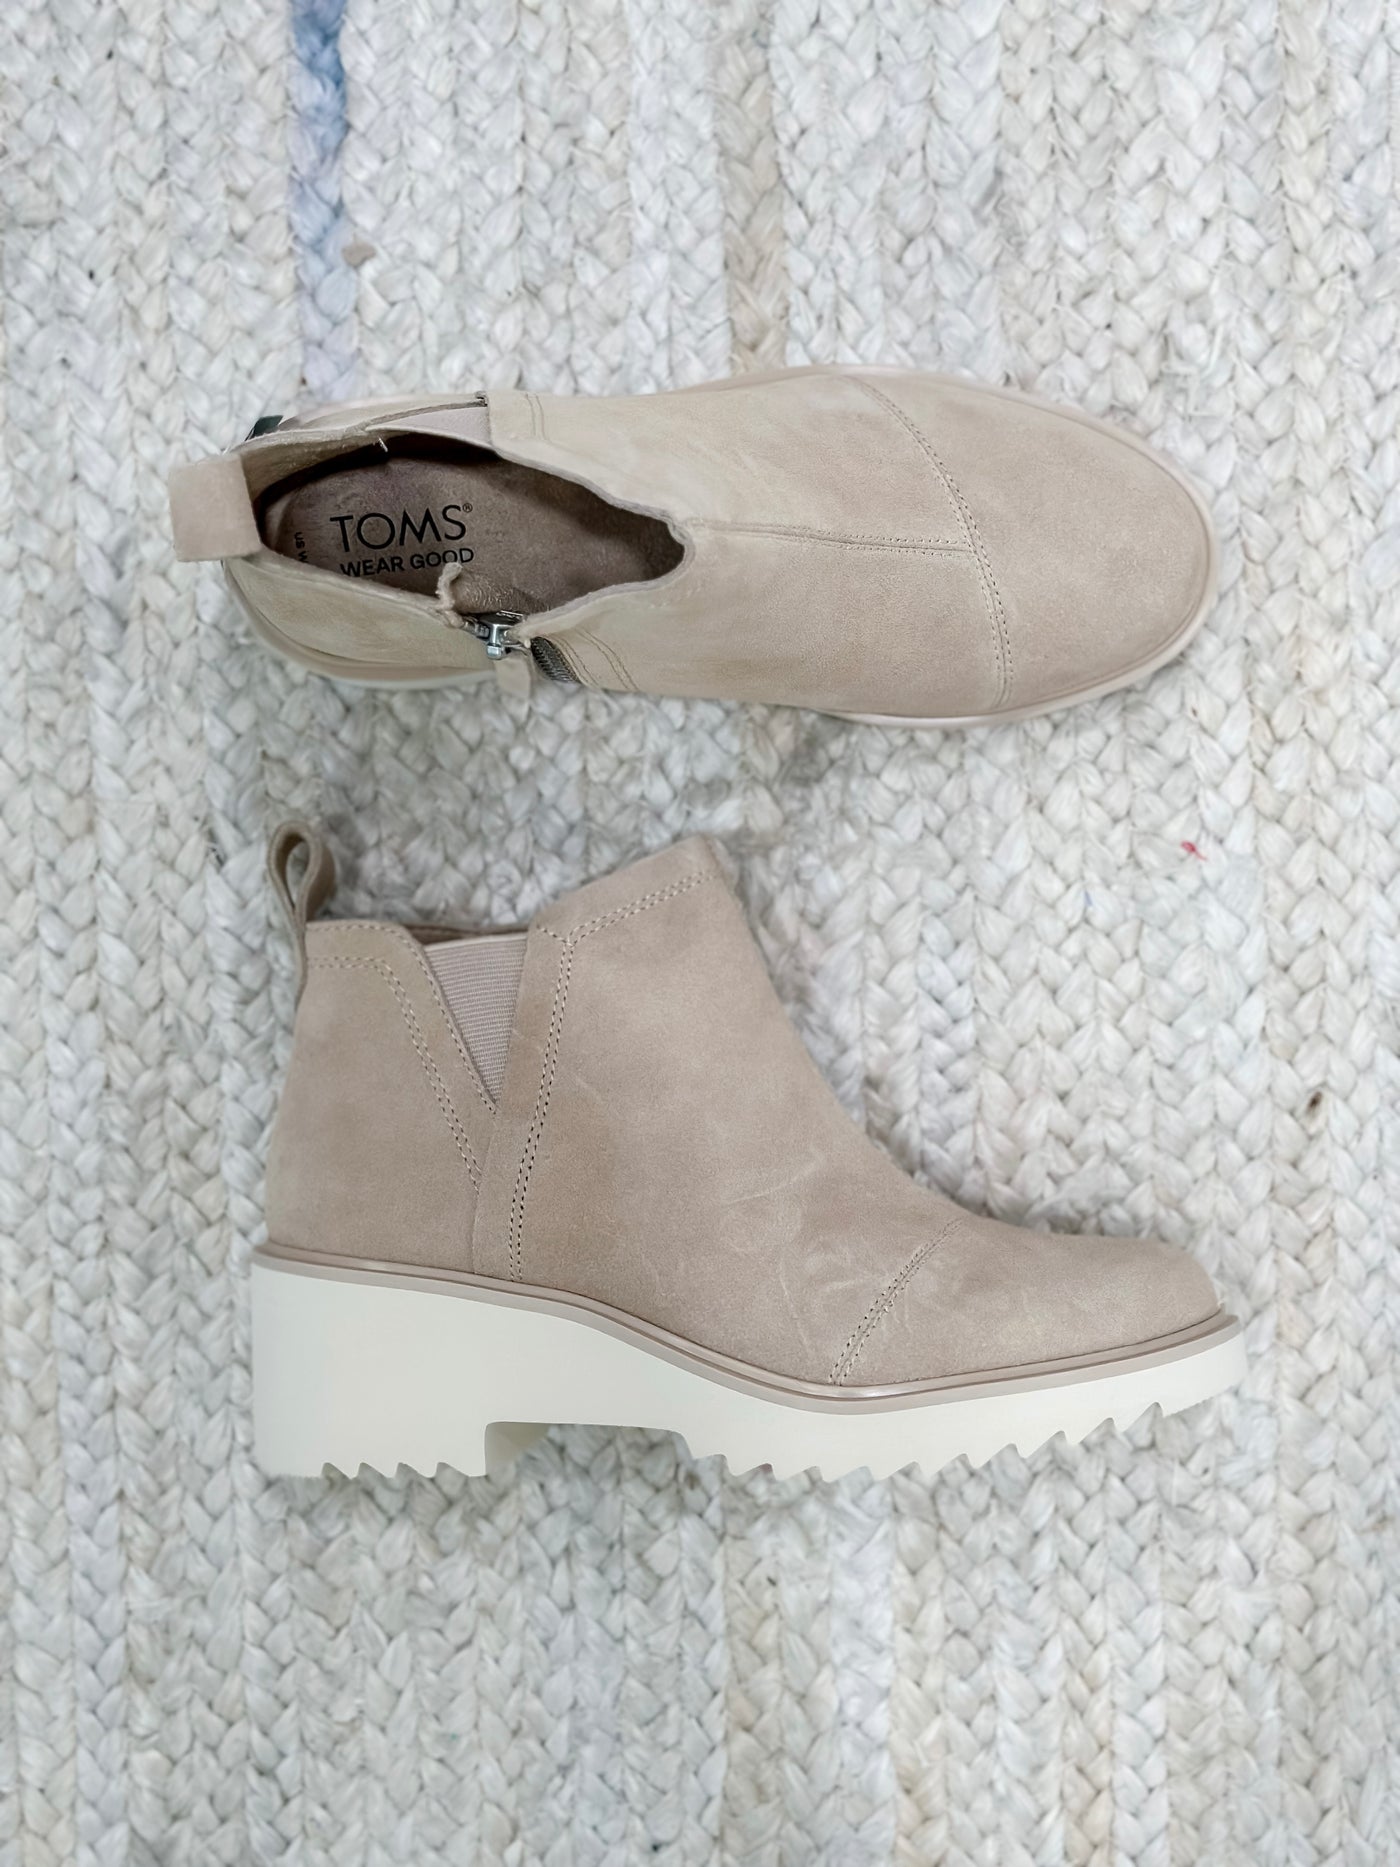 Toms Maude Oatmeal Suede Wedge Boot